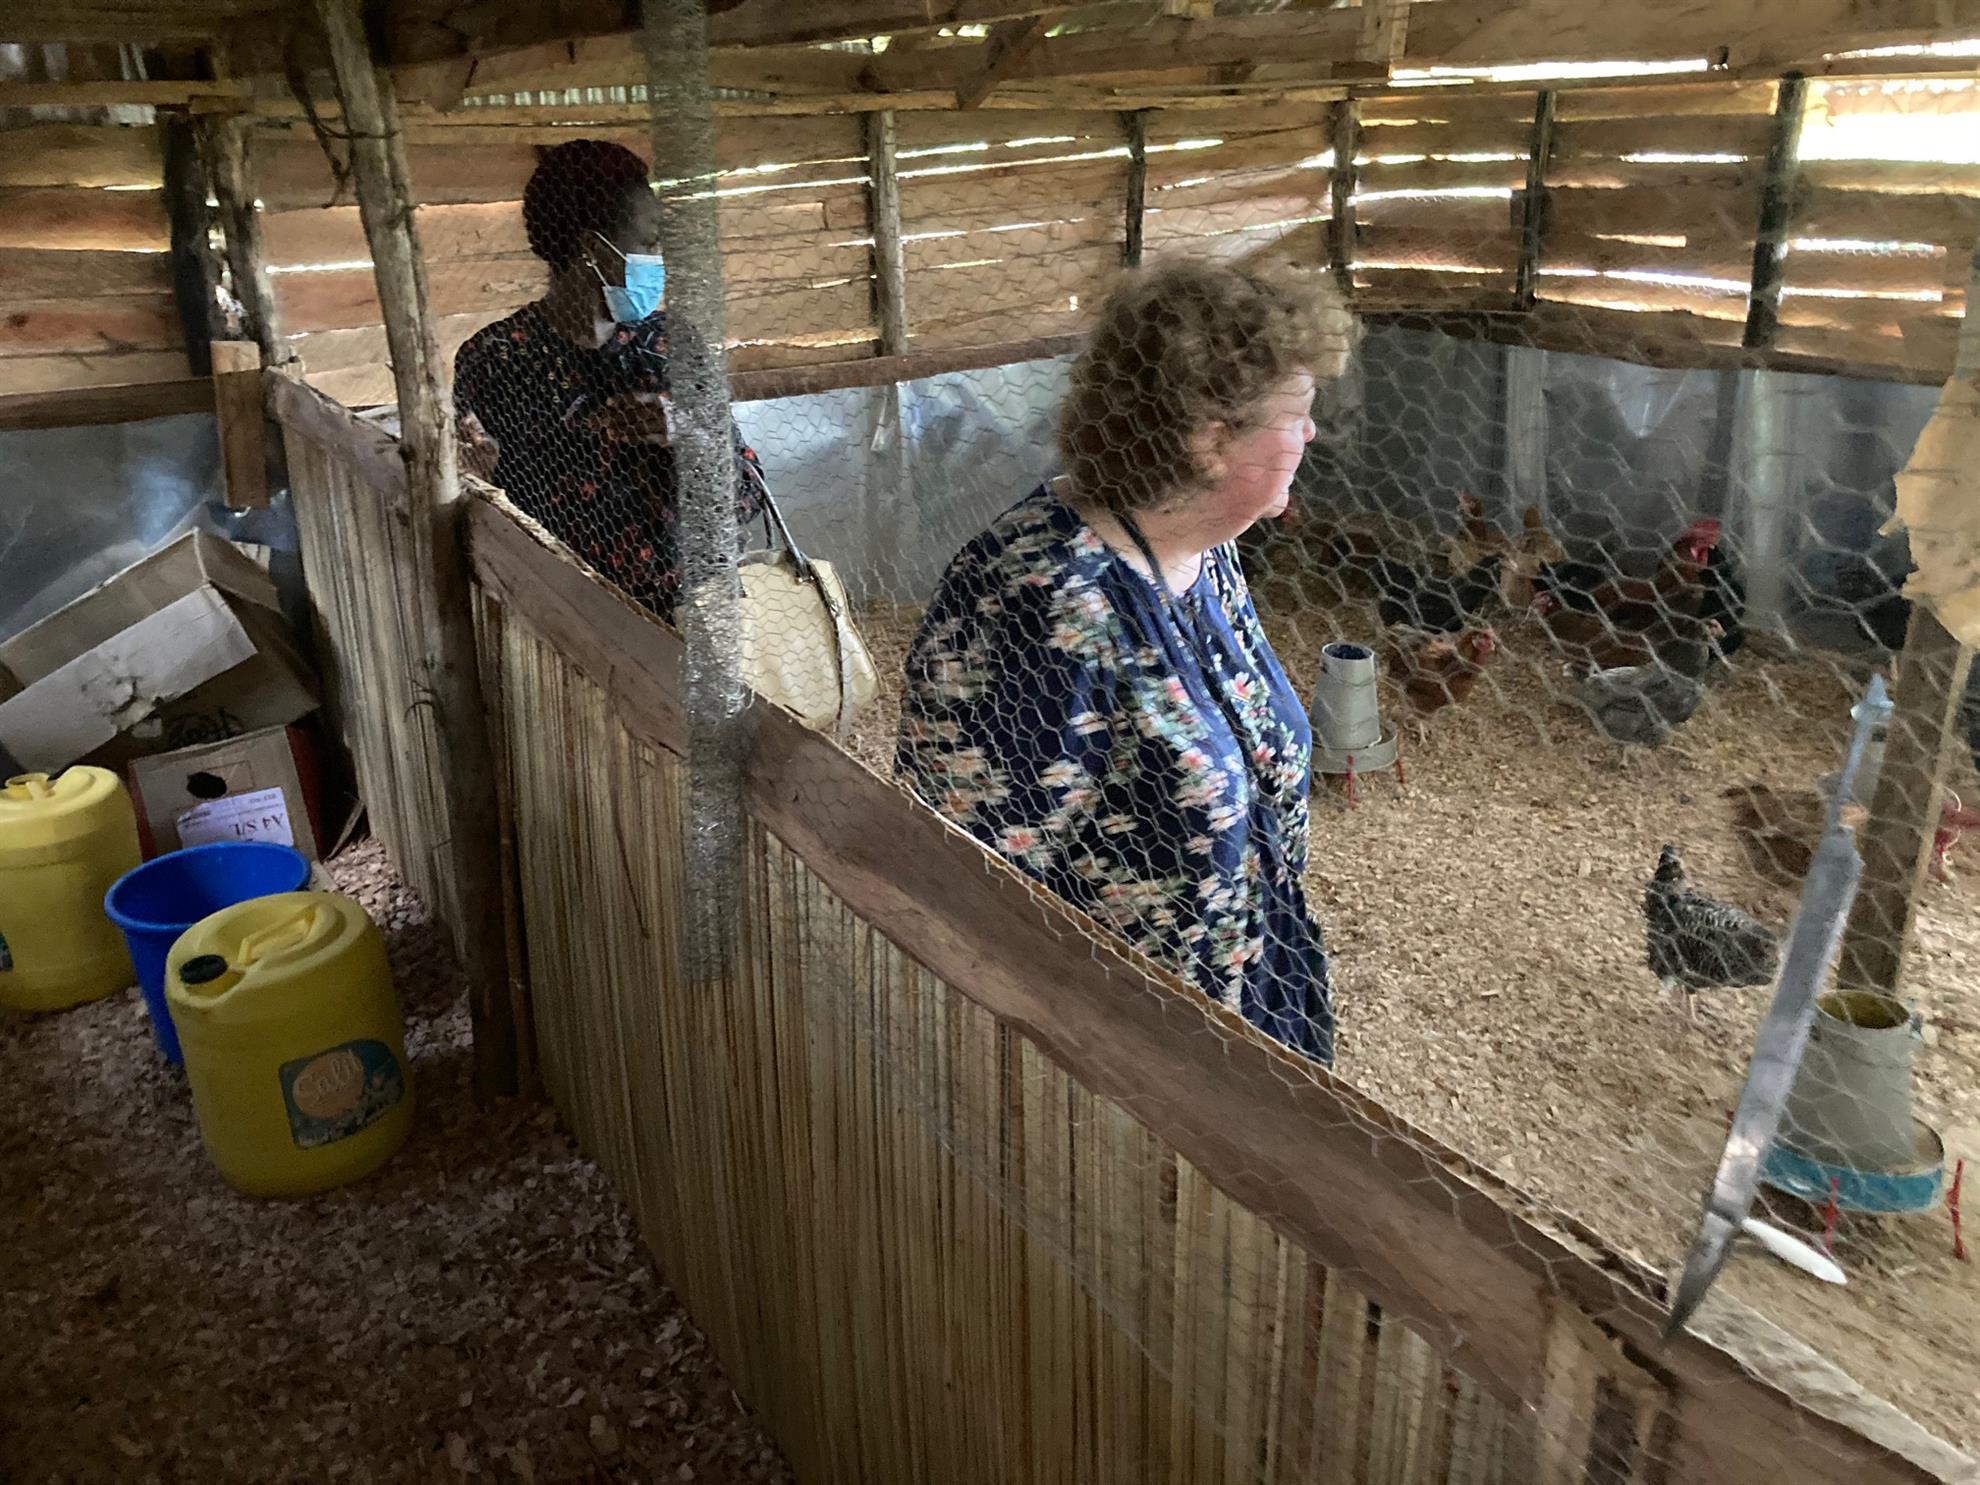 Rotary partner Wanda Salter inspects the chicken coop built with Rotary Club of Bellows Falls funds